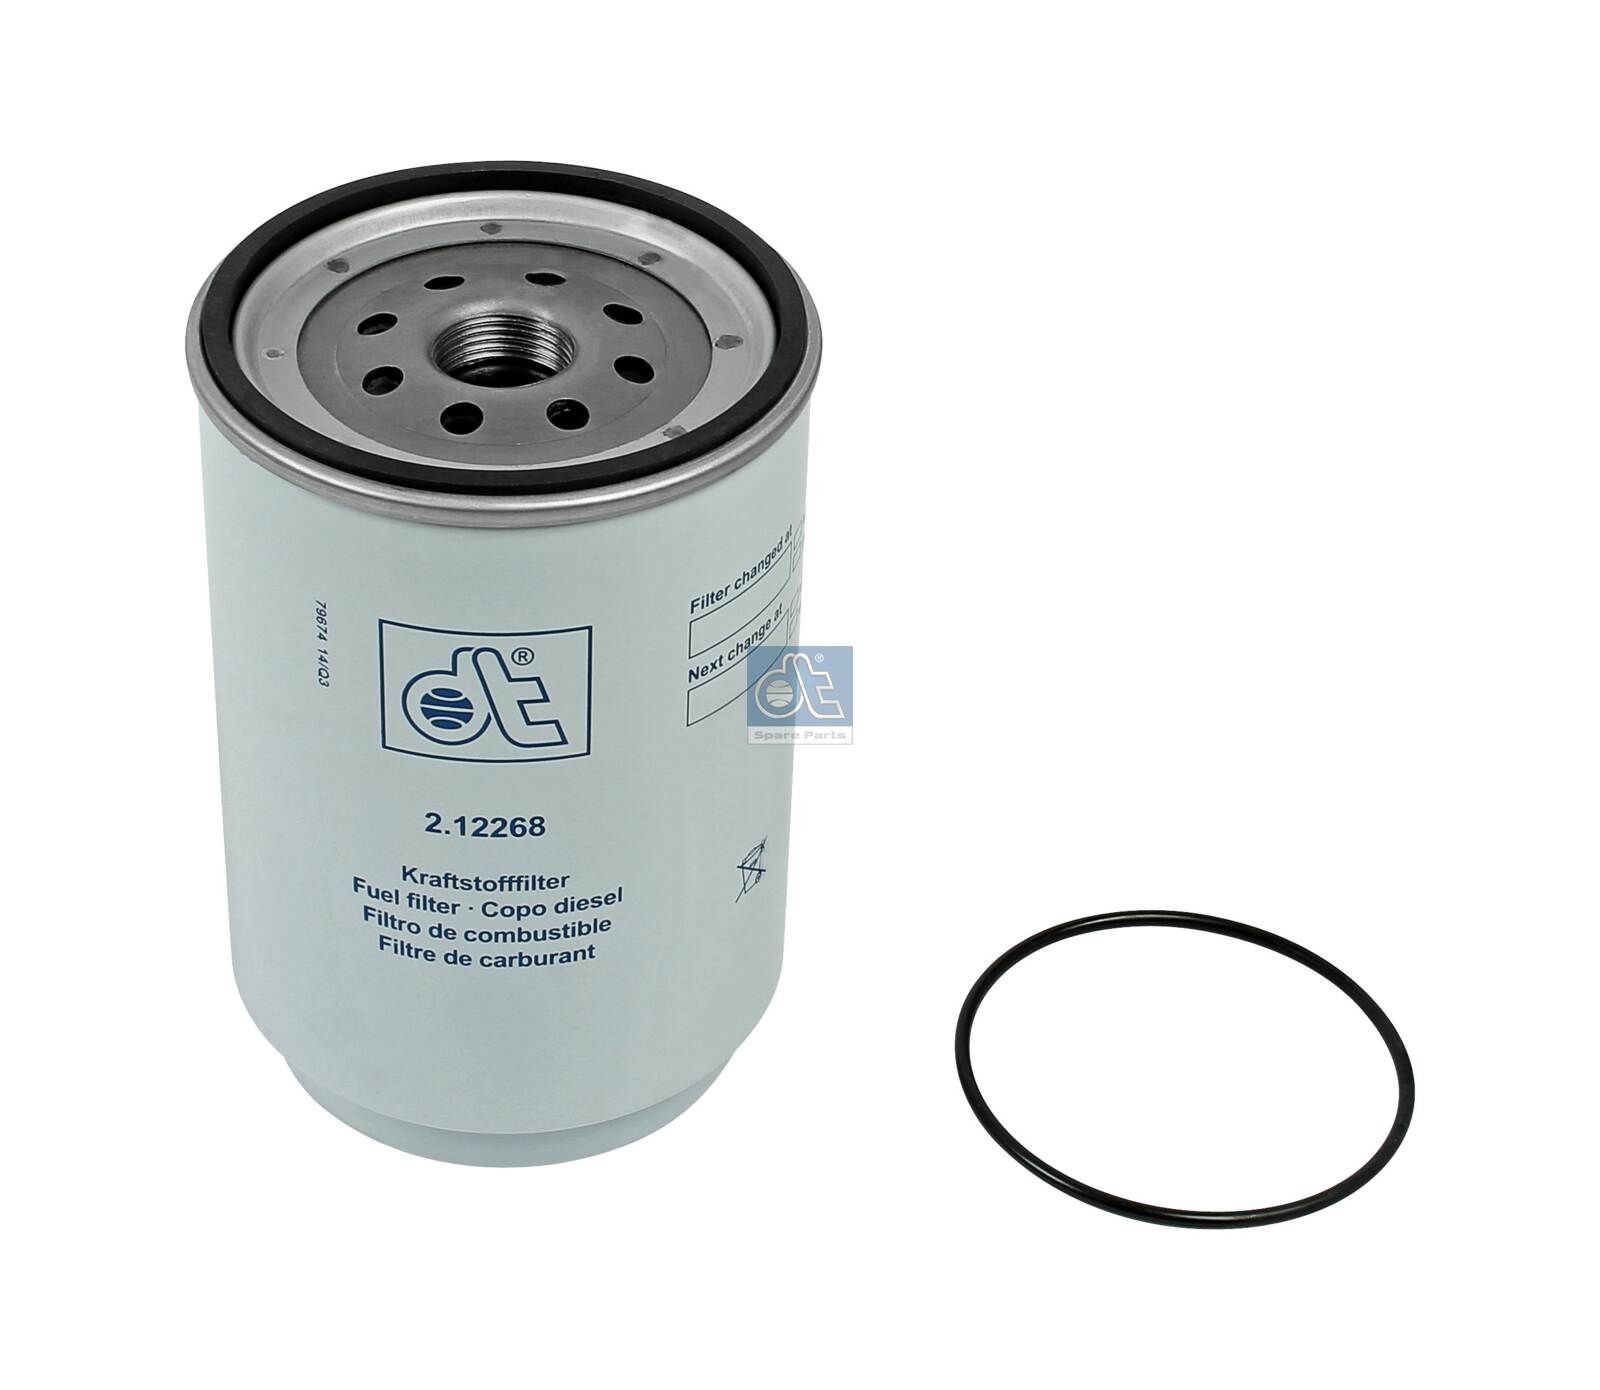 WK 11 001 x DT Spare Parts 2.12268 Fuel filter 7420745605